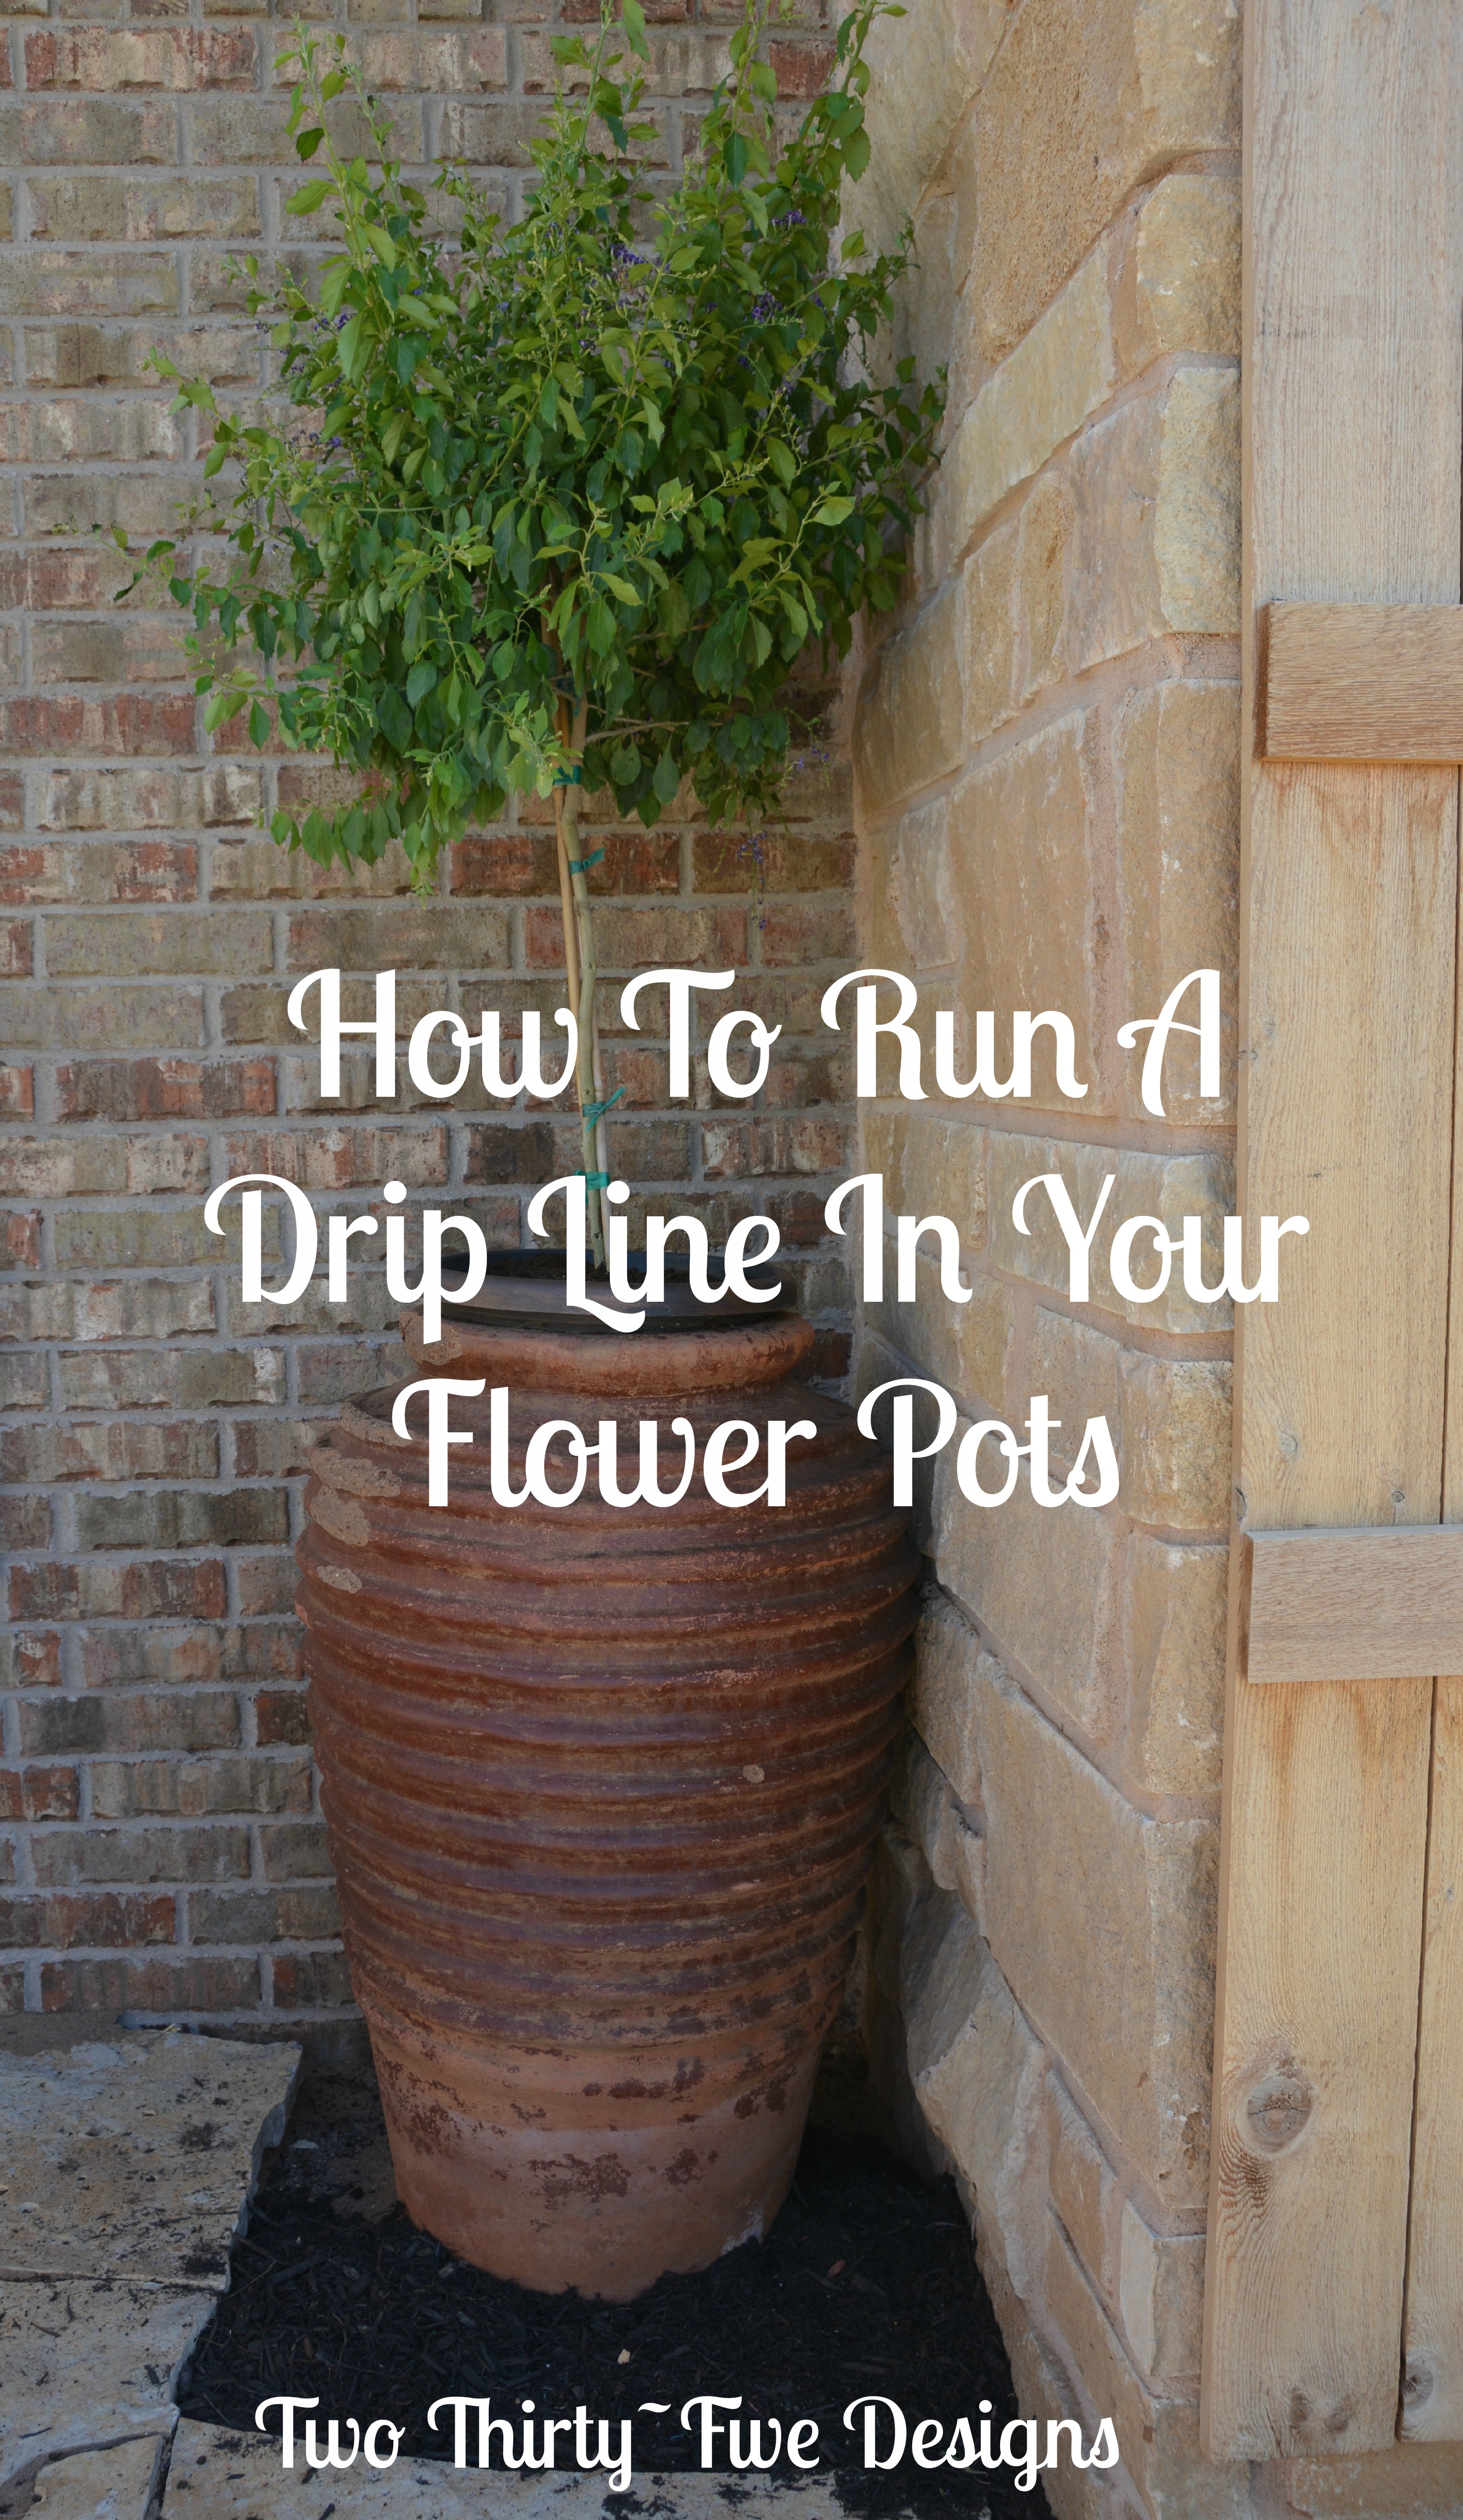 How To Run A Drip Line In Your Flower Pots